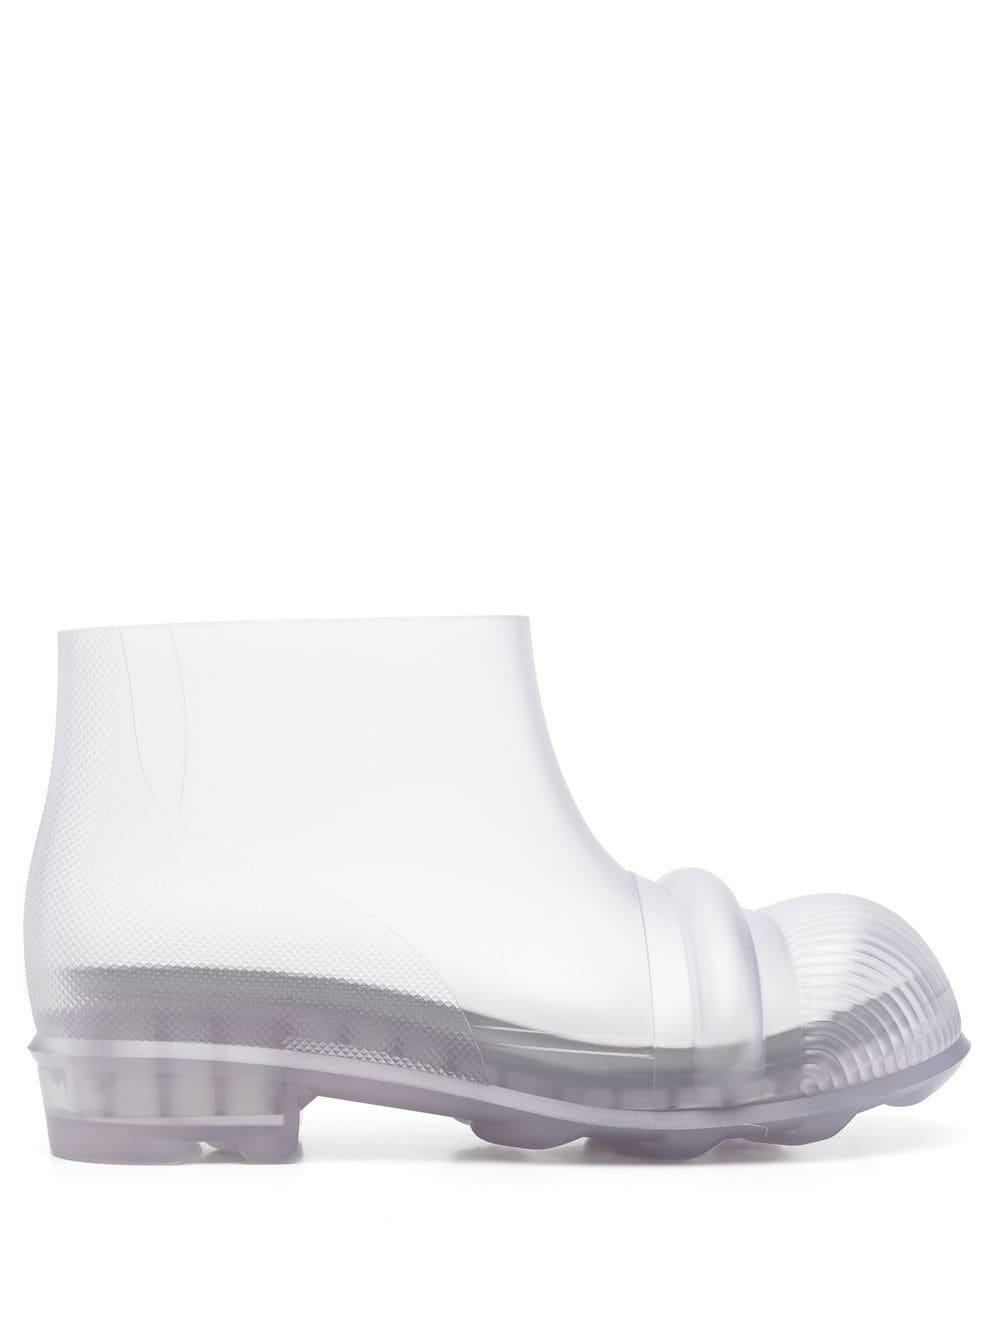 Loewe Transparent-sole Slip-on 60mm Boots in White for Men - Save 6% | Lyst